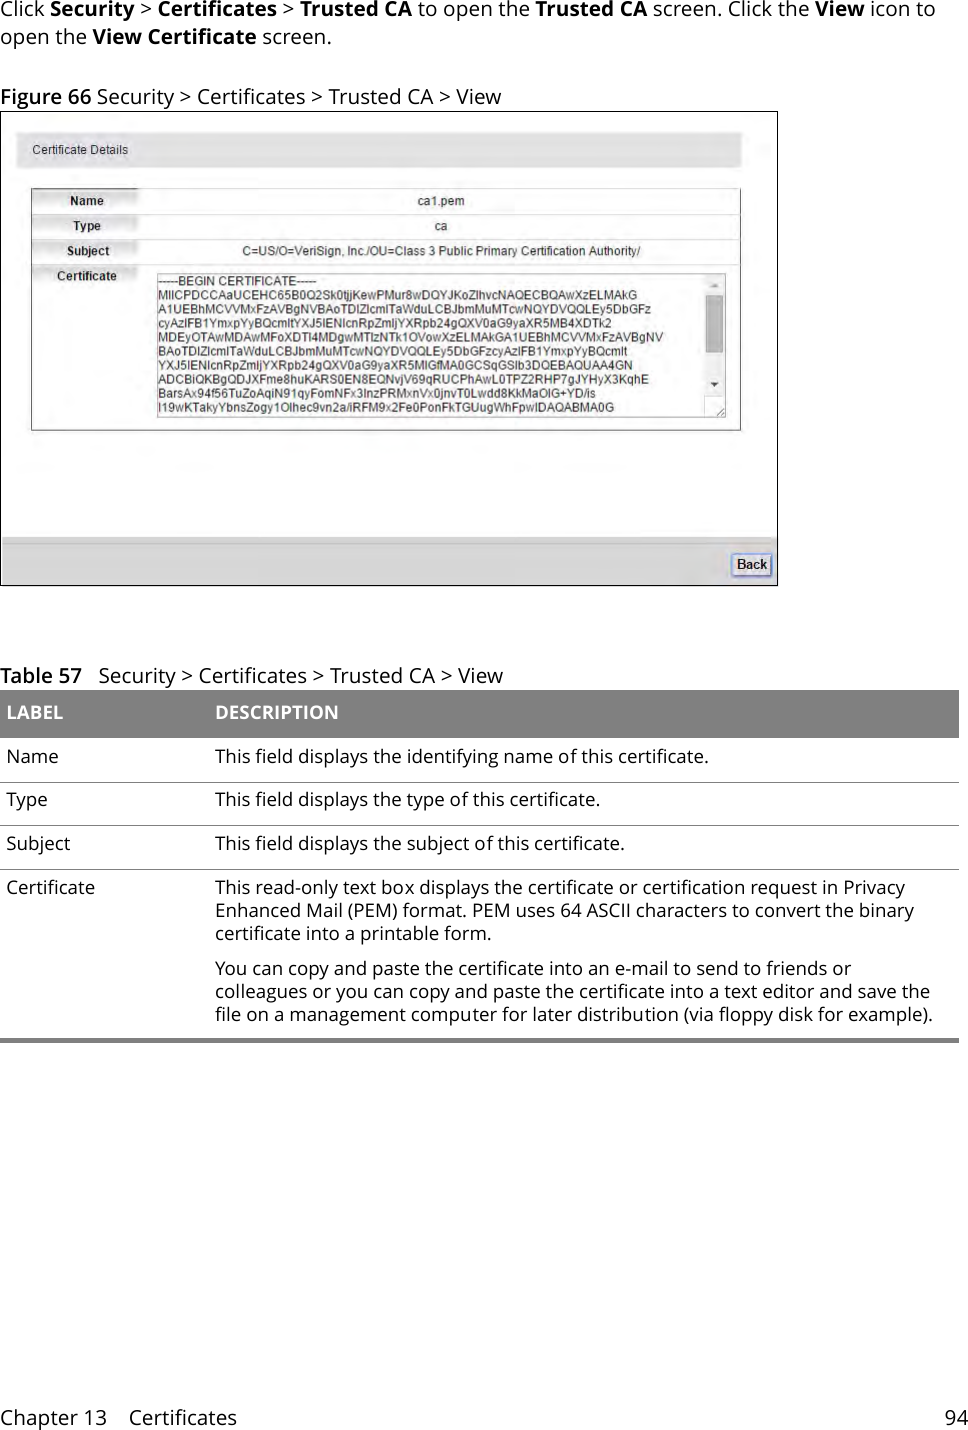 Chapter 13    Certificates 94Click Security &gt; Certificates &gt; Trusted CA to open the Trusted CA screen. Click the View icon to open the View Certificate screen. Figure 66 Security &gt; Certificates &gt; Trusted CA &gt; View Table 57   Security &gt; Certificates &gt; Trusted CA &gt; View LABEL DESCRIPTIONName This field displays the identifying name of this certificate.Type This field displays the type of this certificate.Subject  This field displays the subject of this certificate.Certificate This read-only text box displays the certificate or certification request in Privacy Enhanced Mail (PEM) format. PEM uses 64 ASCII characters to convert the binary certificate into a printable form. You can copy and paste the certificate into an e-mail to send to friends or colleagues or you can copy and paste the certificate into a text editor and save the file on a management computer for later distribution (via floppy disk for example).